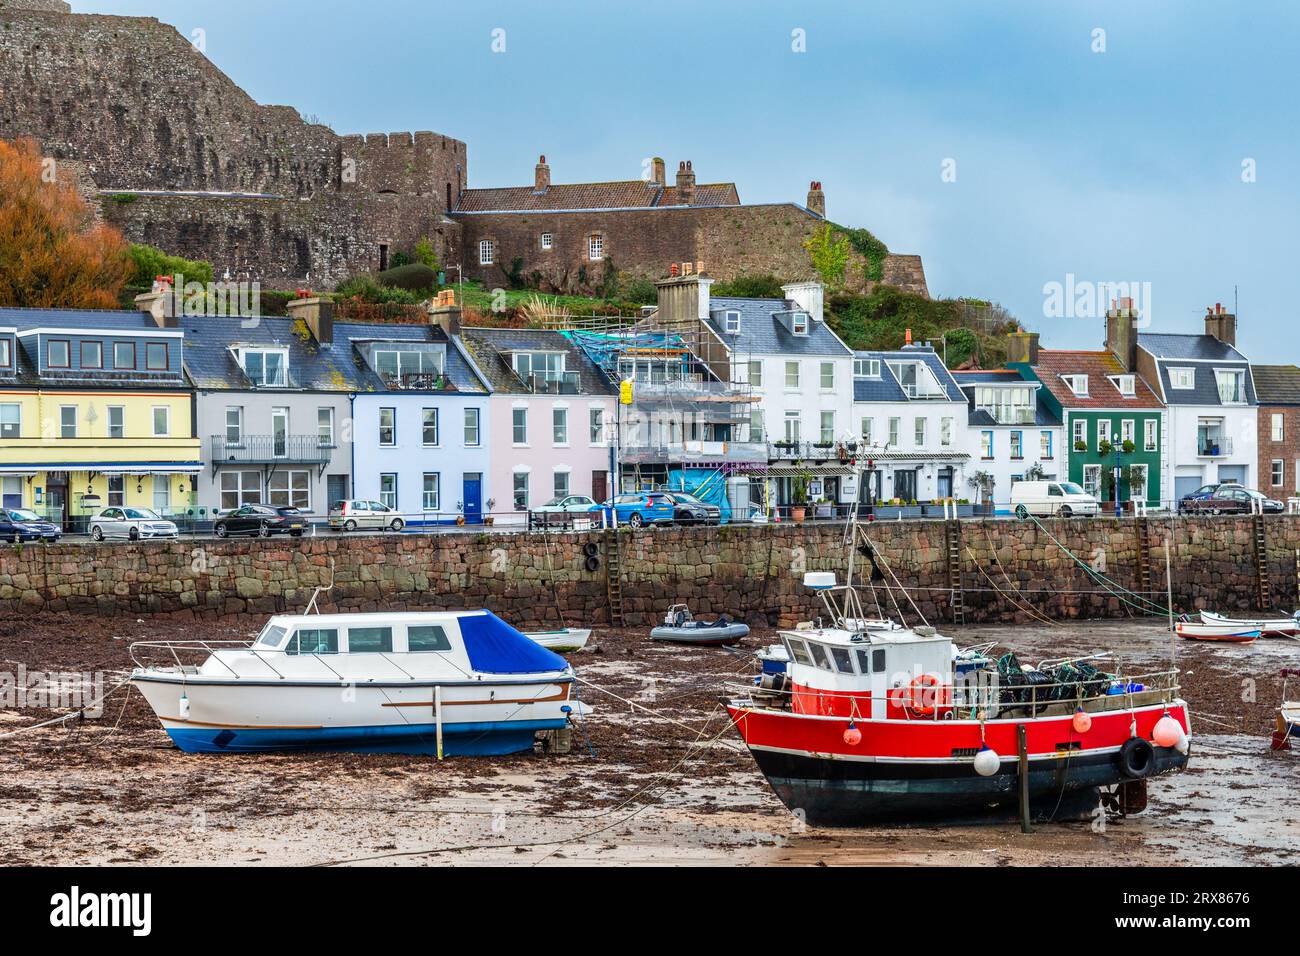 Gorey village promenade with yachts on the shore in a low tide, Saint Martin, bailiwick of Jersey, Channel Islands, Great Britain8 Stock Photo